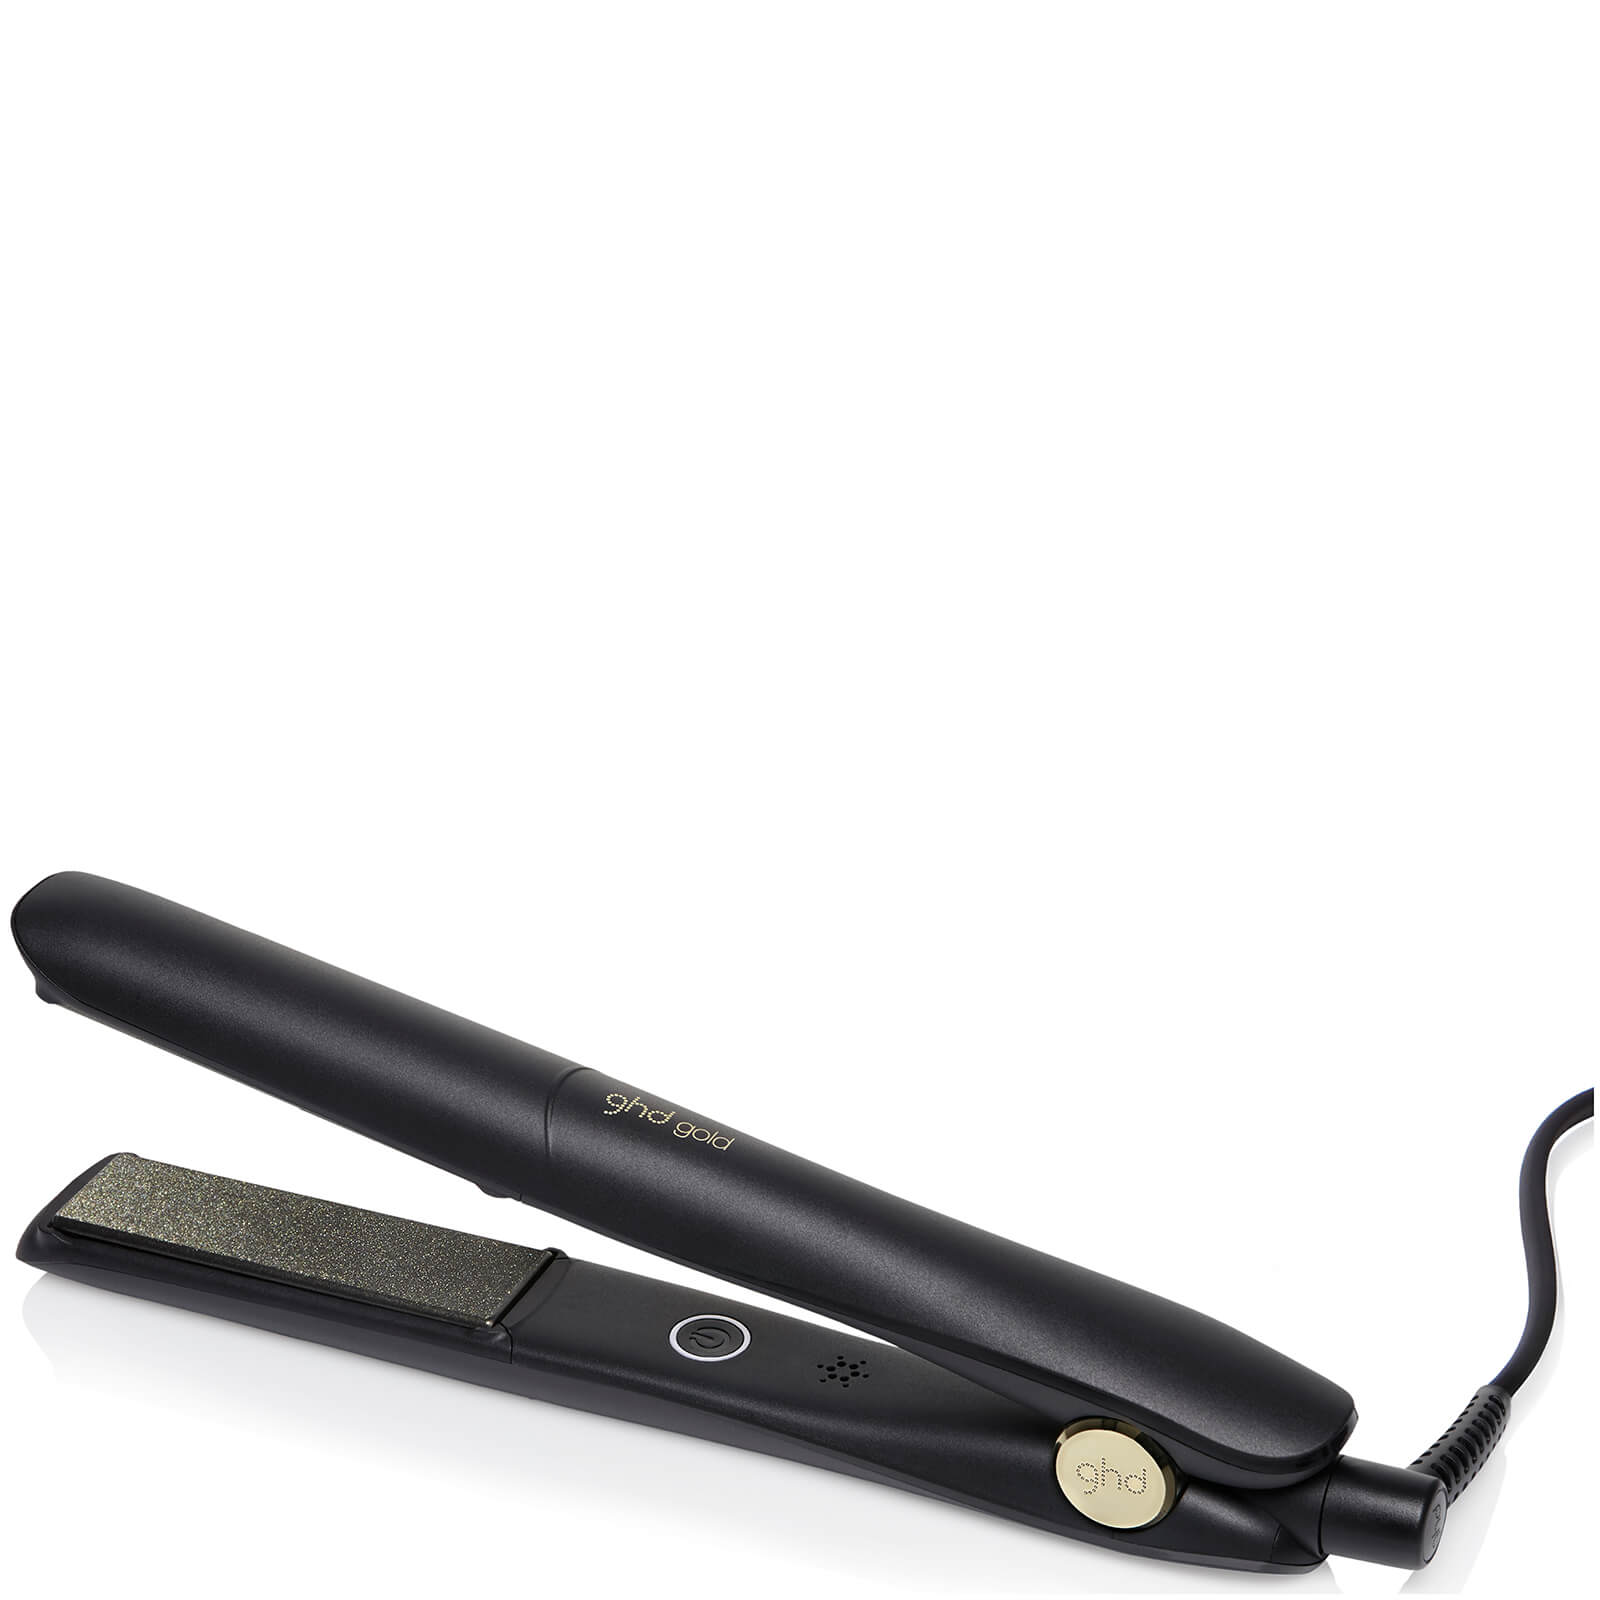 ghd Gold Styler flat irons to create smooth hair